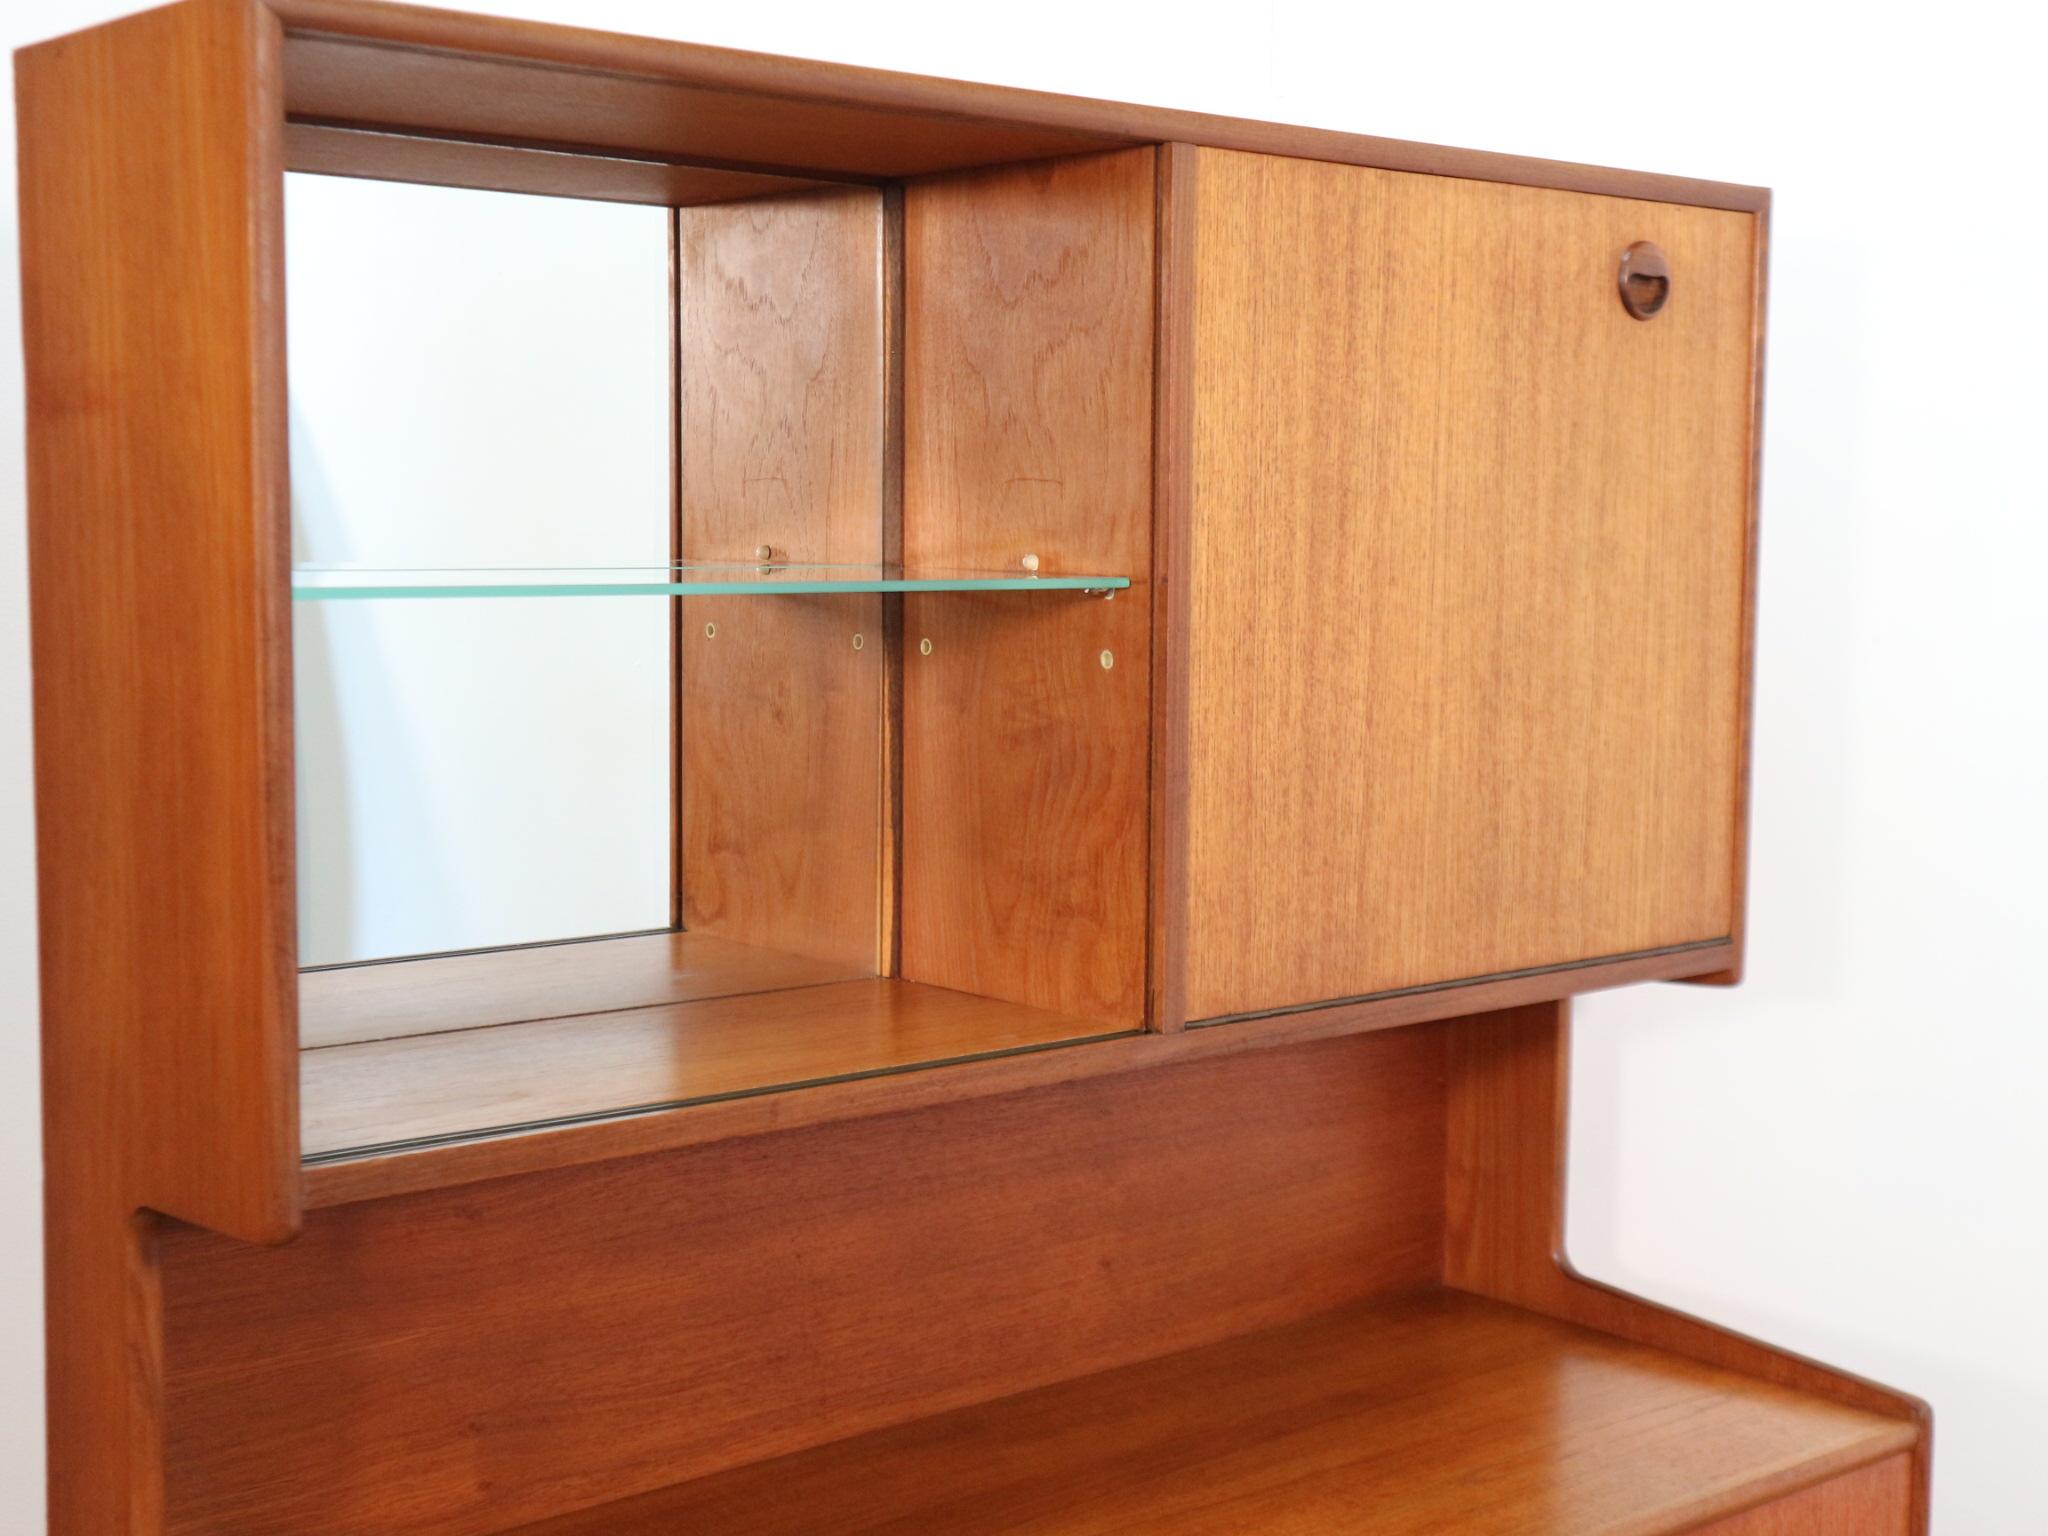 This mid century teak display cabinet with Danish design influence and manufactured by Turnidge of London in late 60's would make a fabulous addition to any space, it's unusal design makes it a stand out and can be used for a variety of uses.